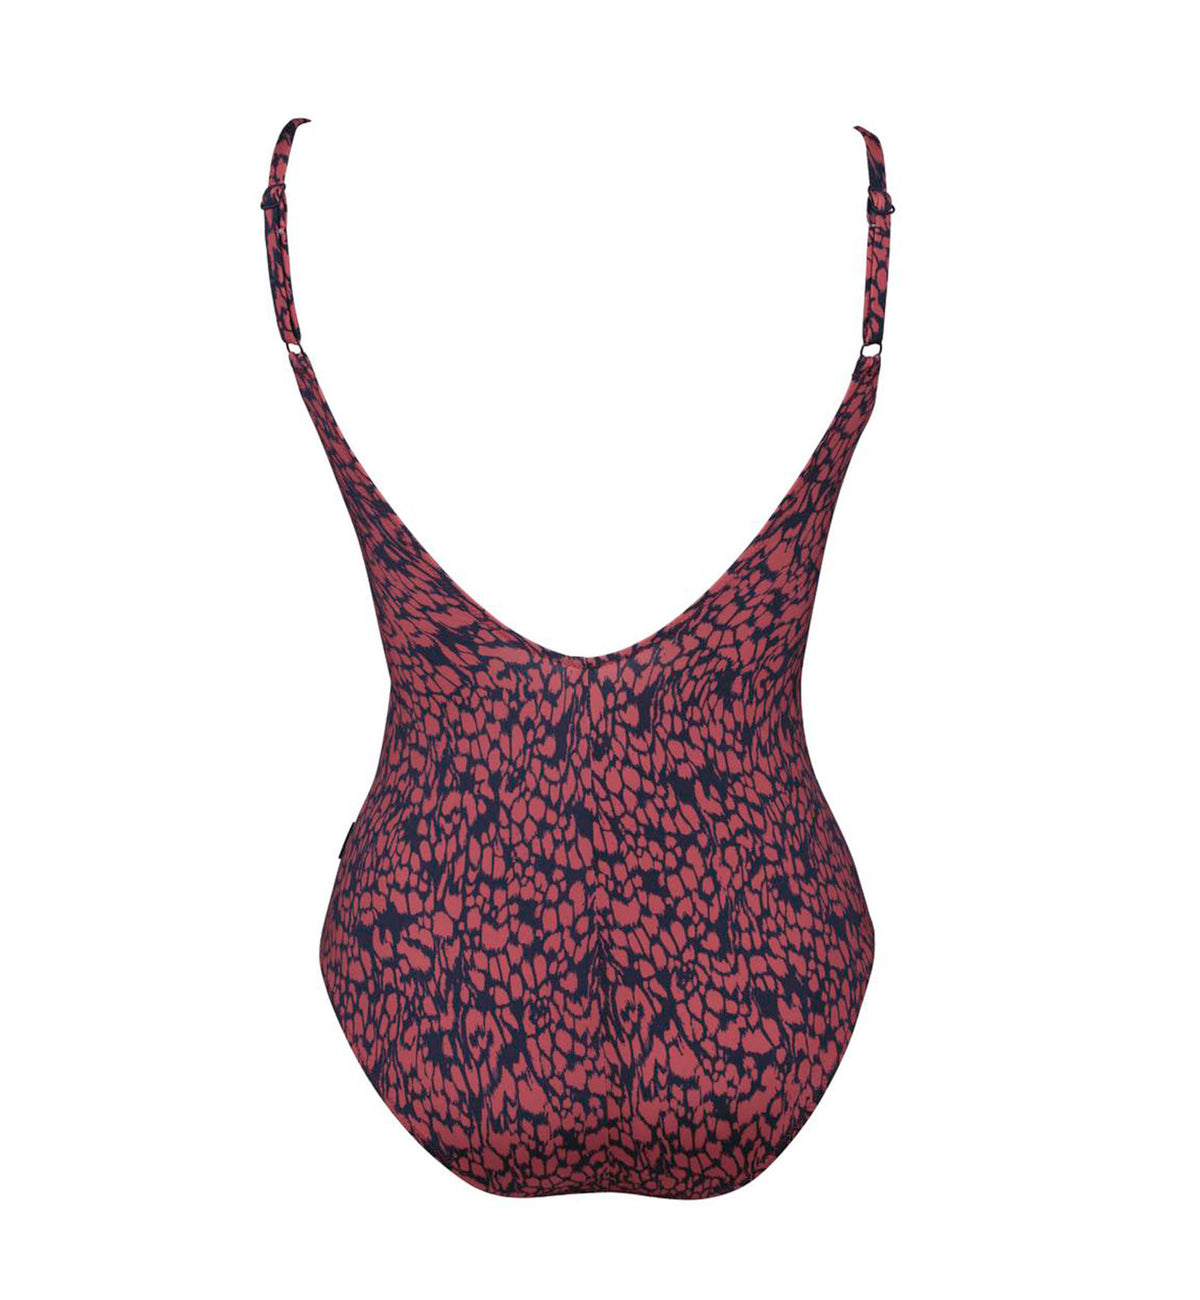 Anita Marble Beach Mona Underwire One Piece Swimsuit (7799),32D,Rosewood - Rosewood,32D